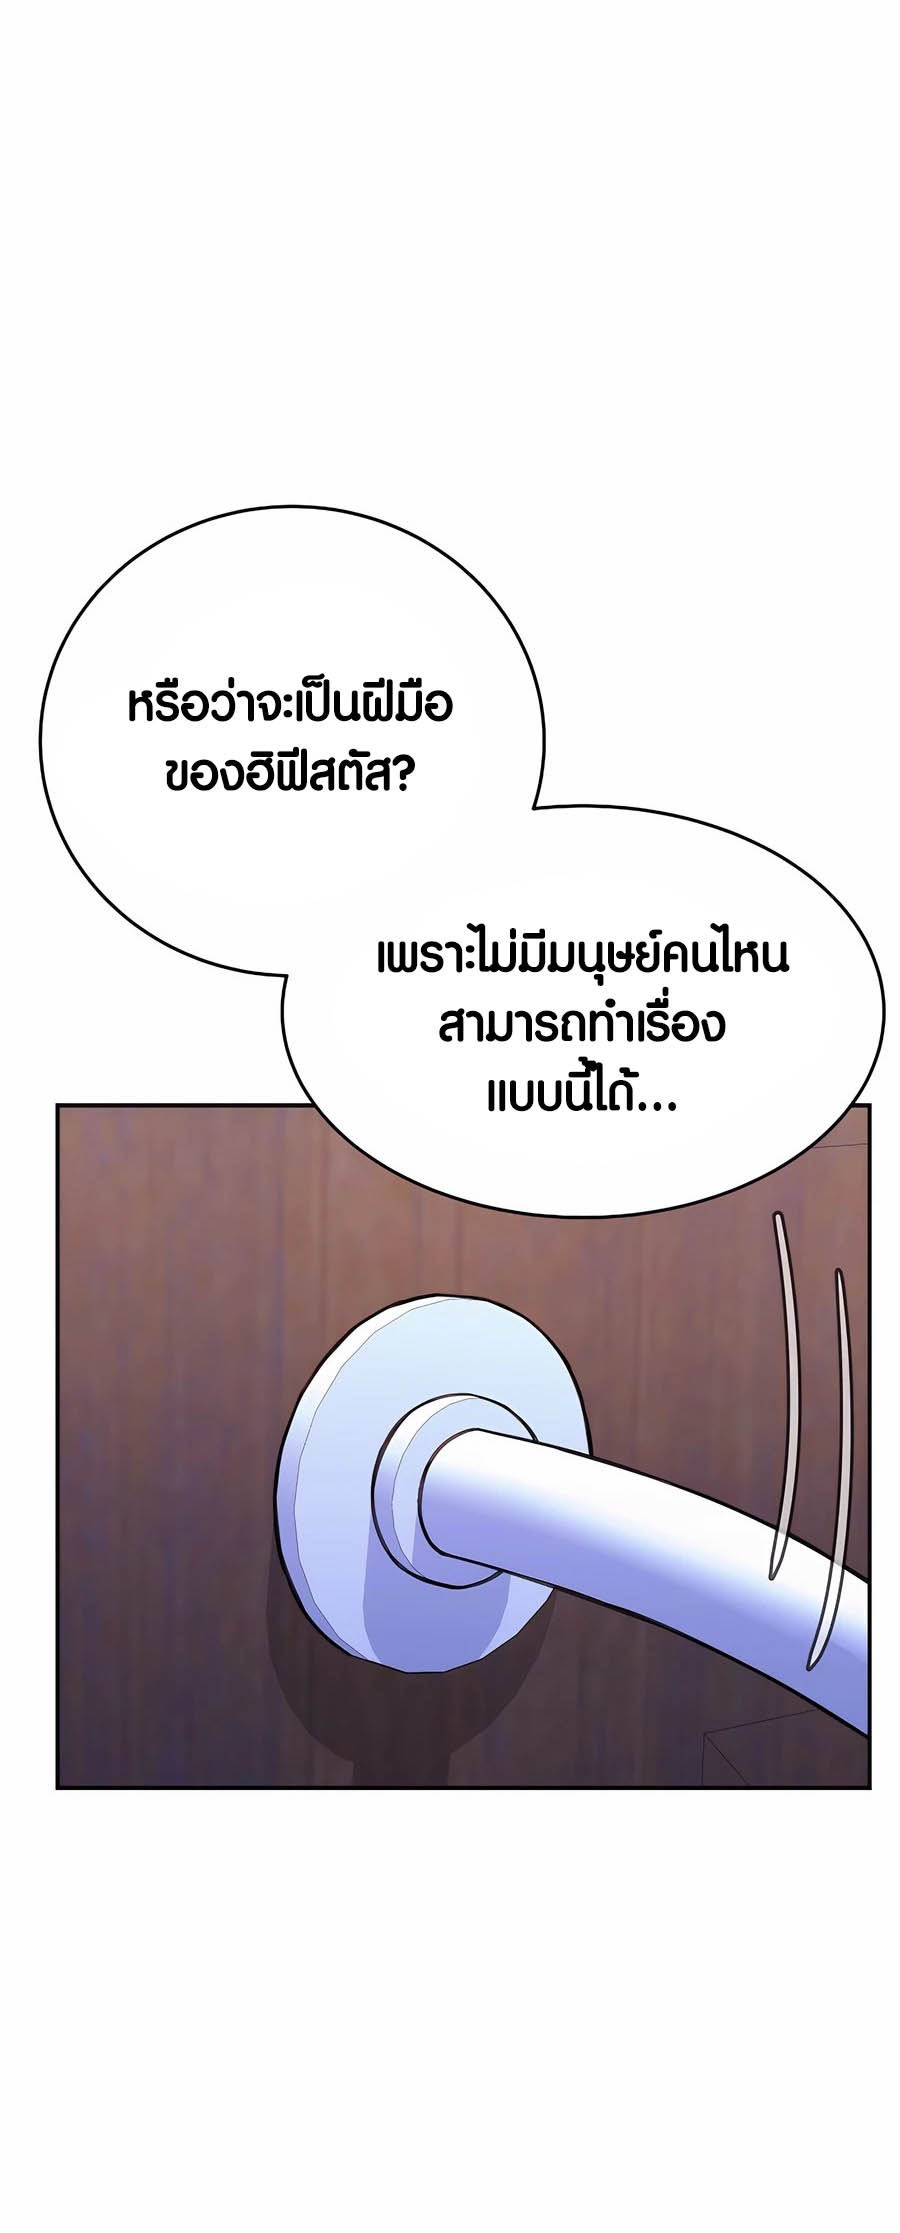 à¸­à¹ˆà¸²à¸™à¸¡à¸±à¸™à¸®à¸§à¸² à¹€à¸£à¸·à¹ˆà¸­à¸‡ The Part Time Land of the Gods 57 05